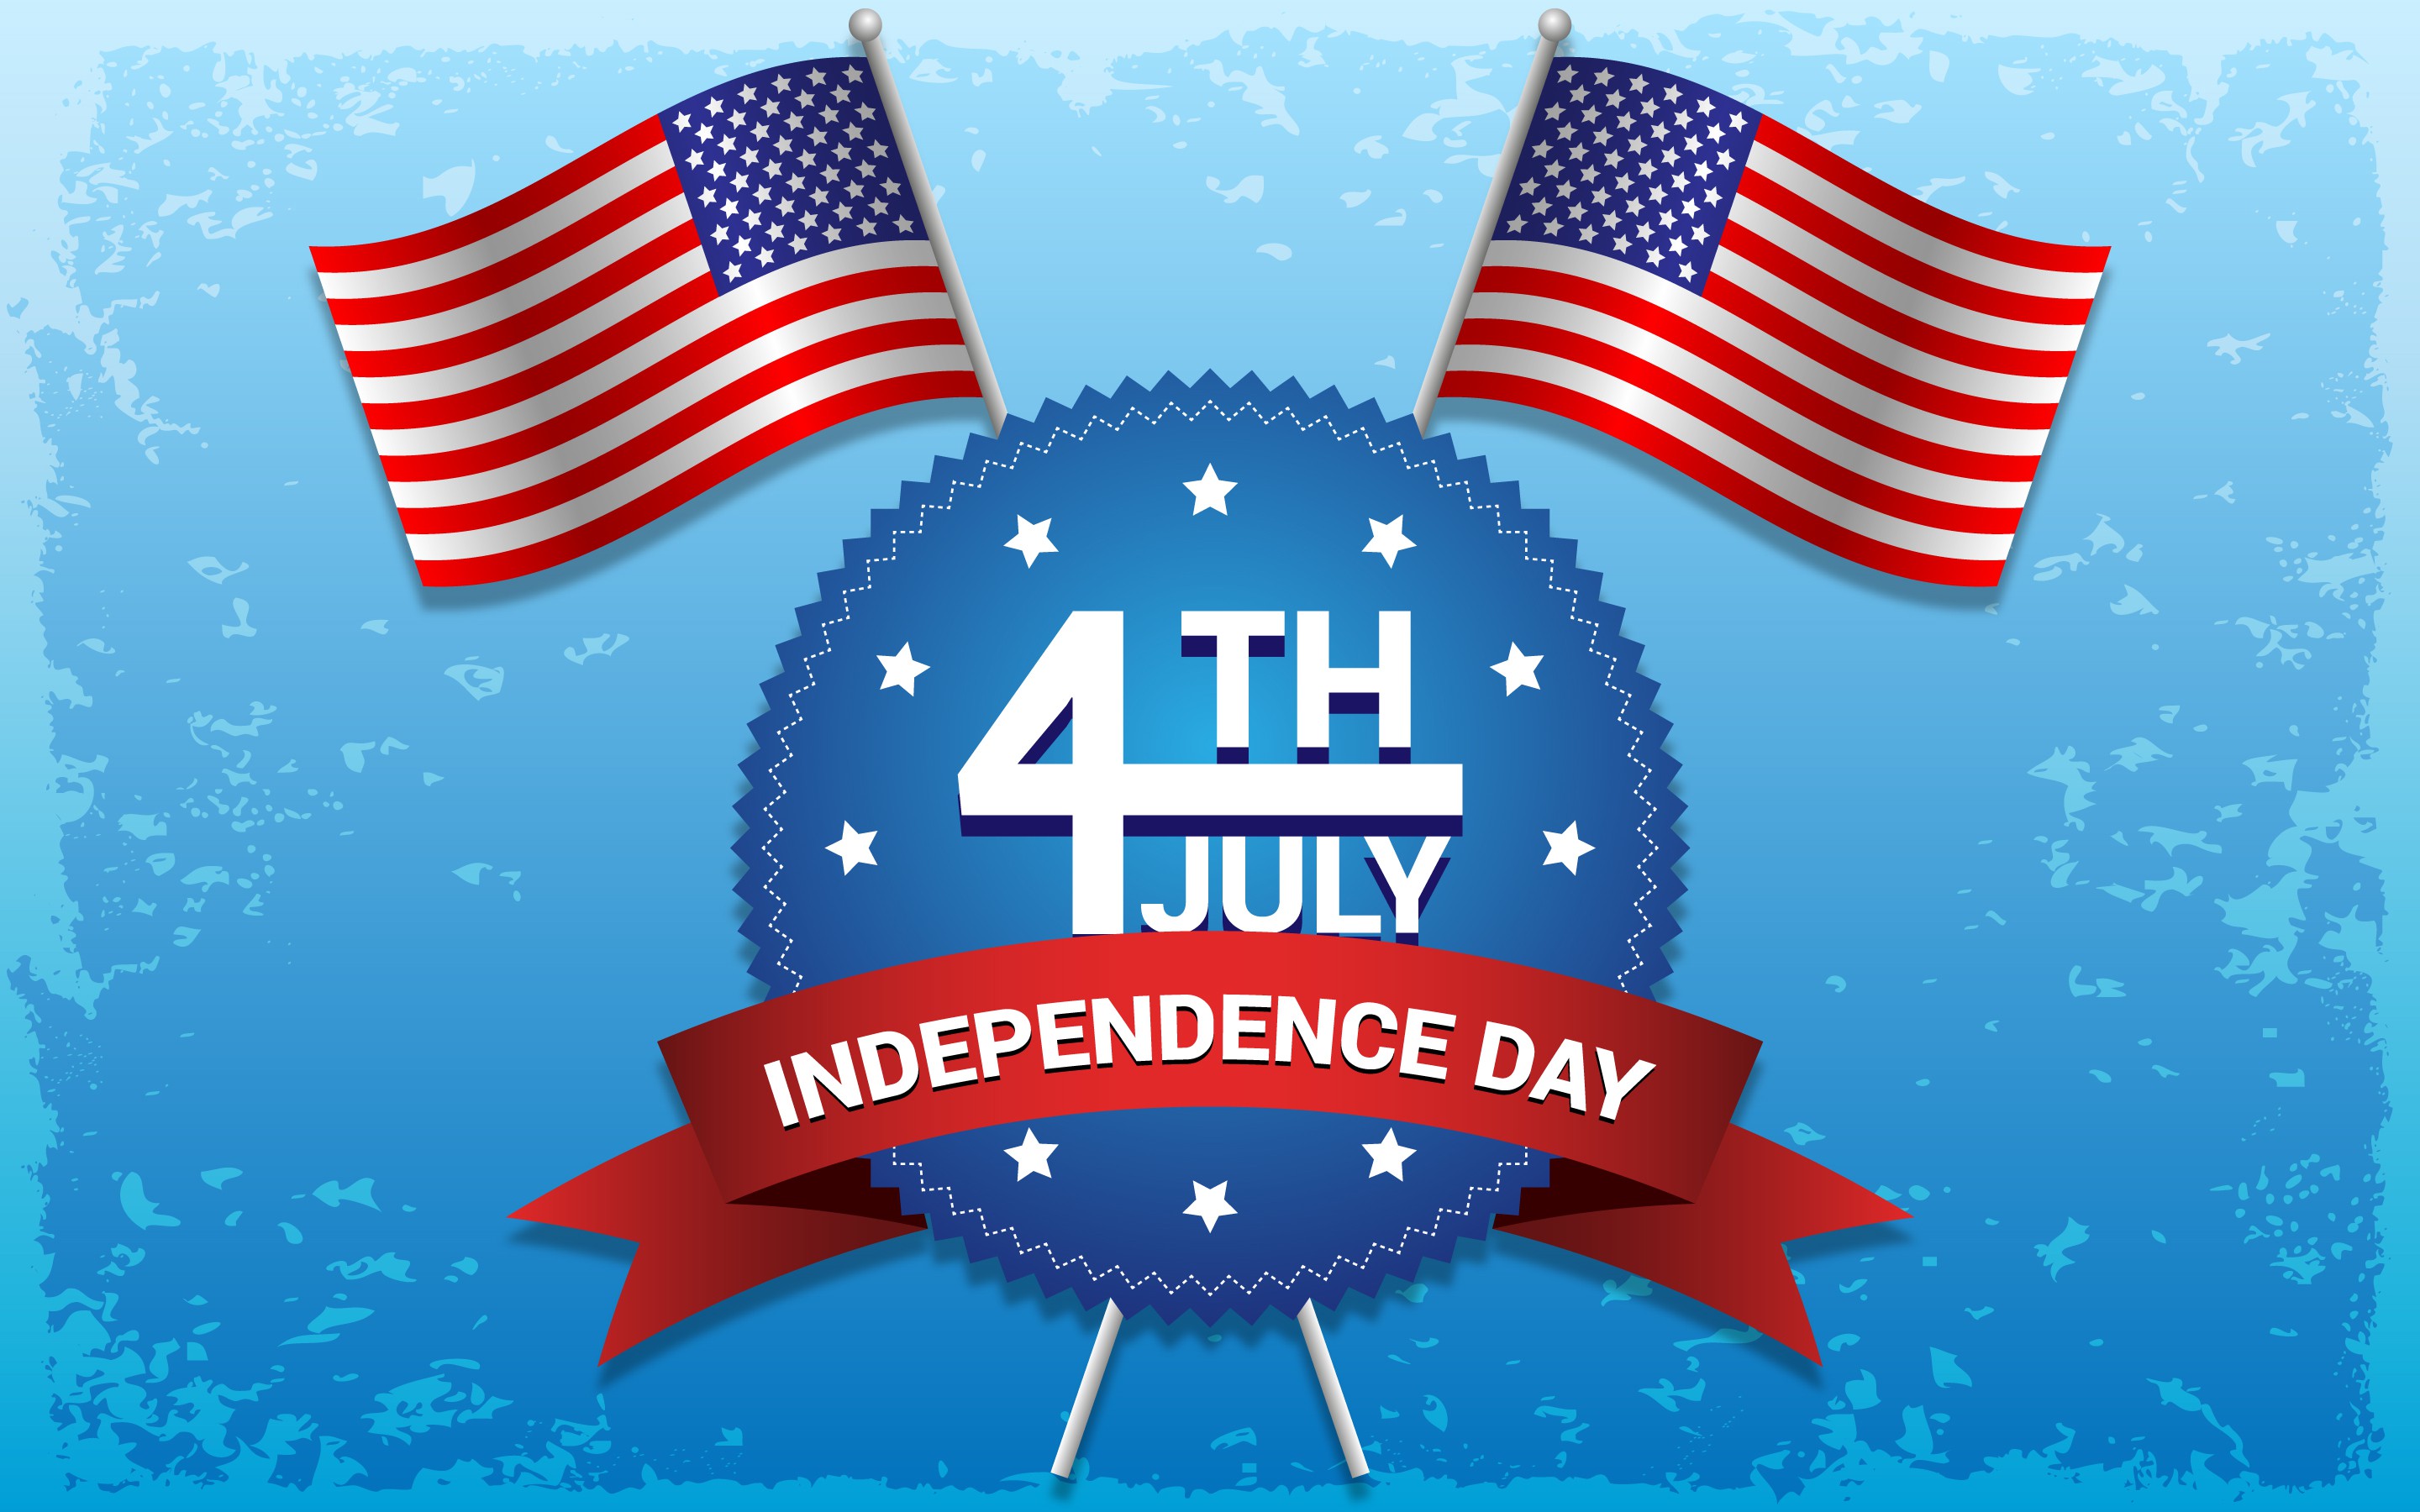 Us Independence Day 2018 - HD Wallpaper 